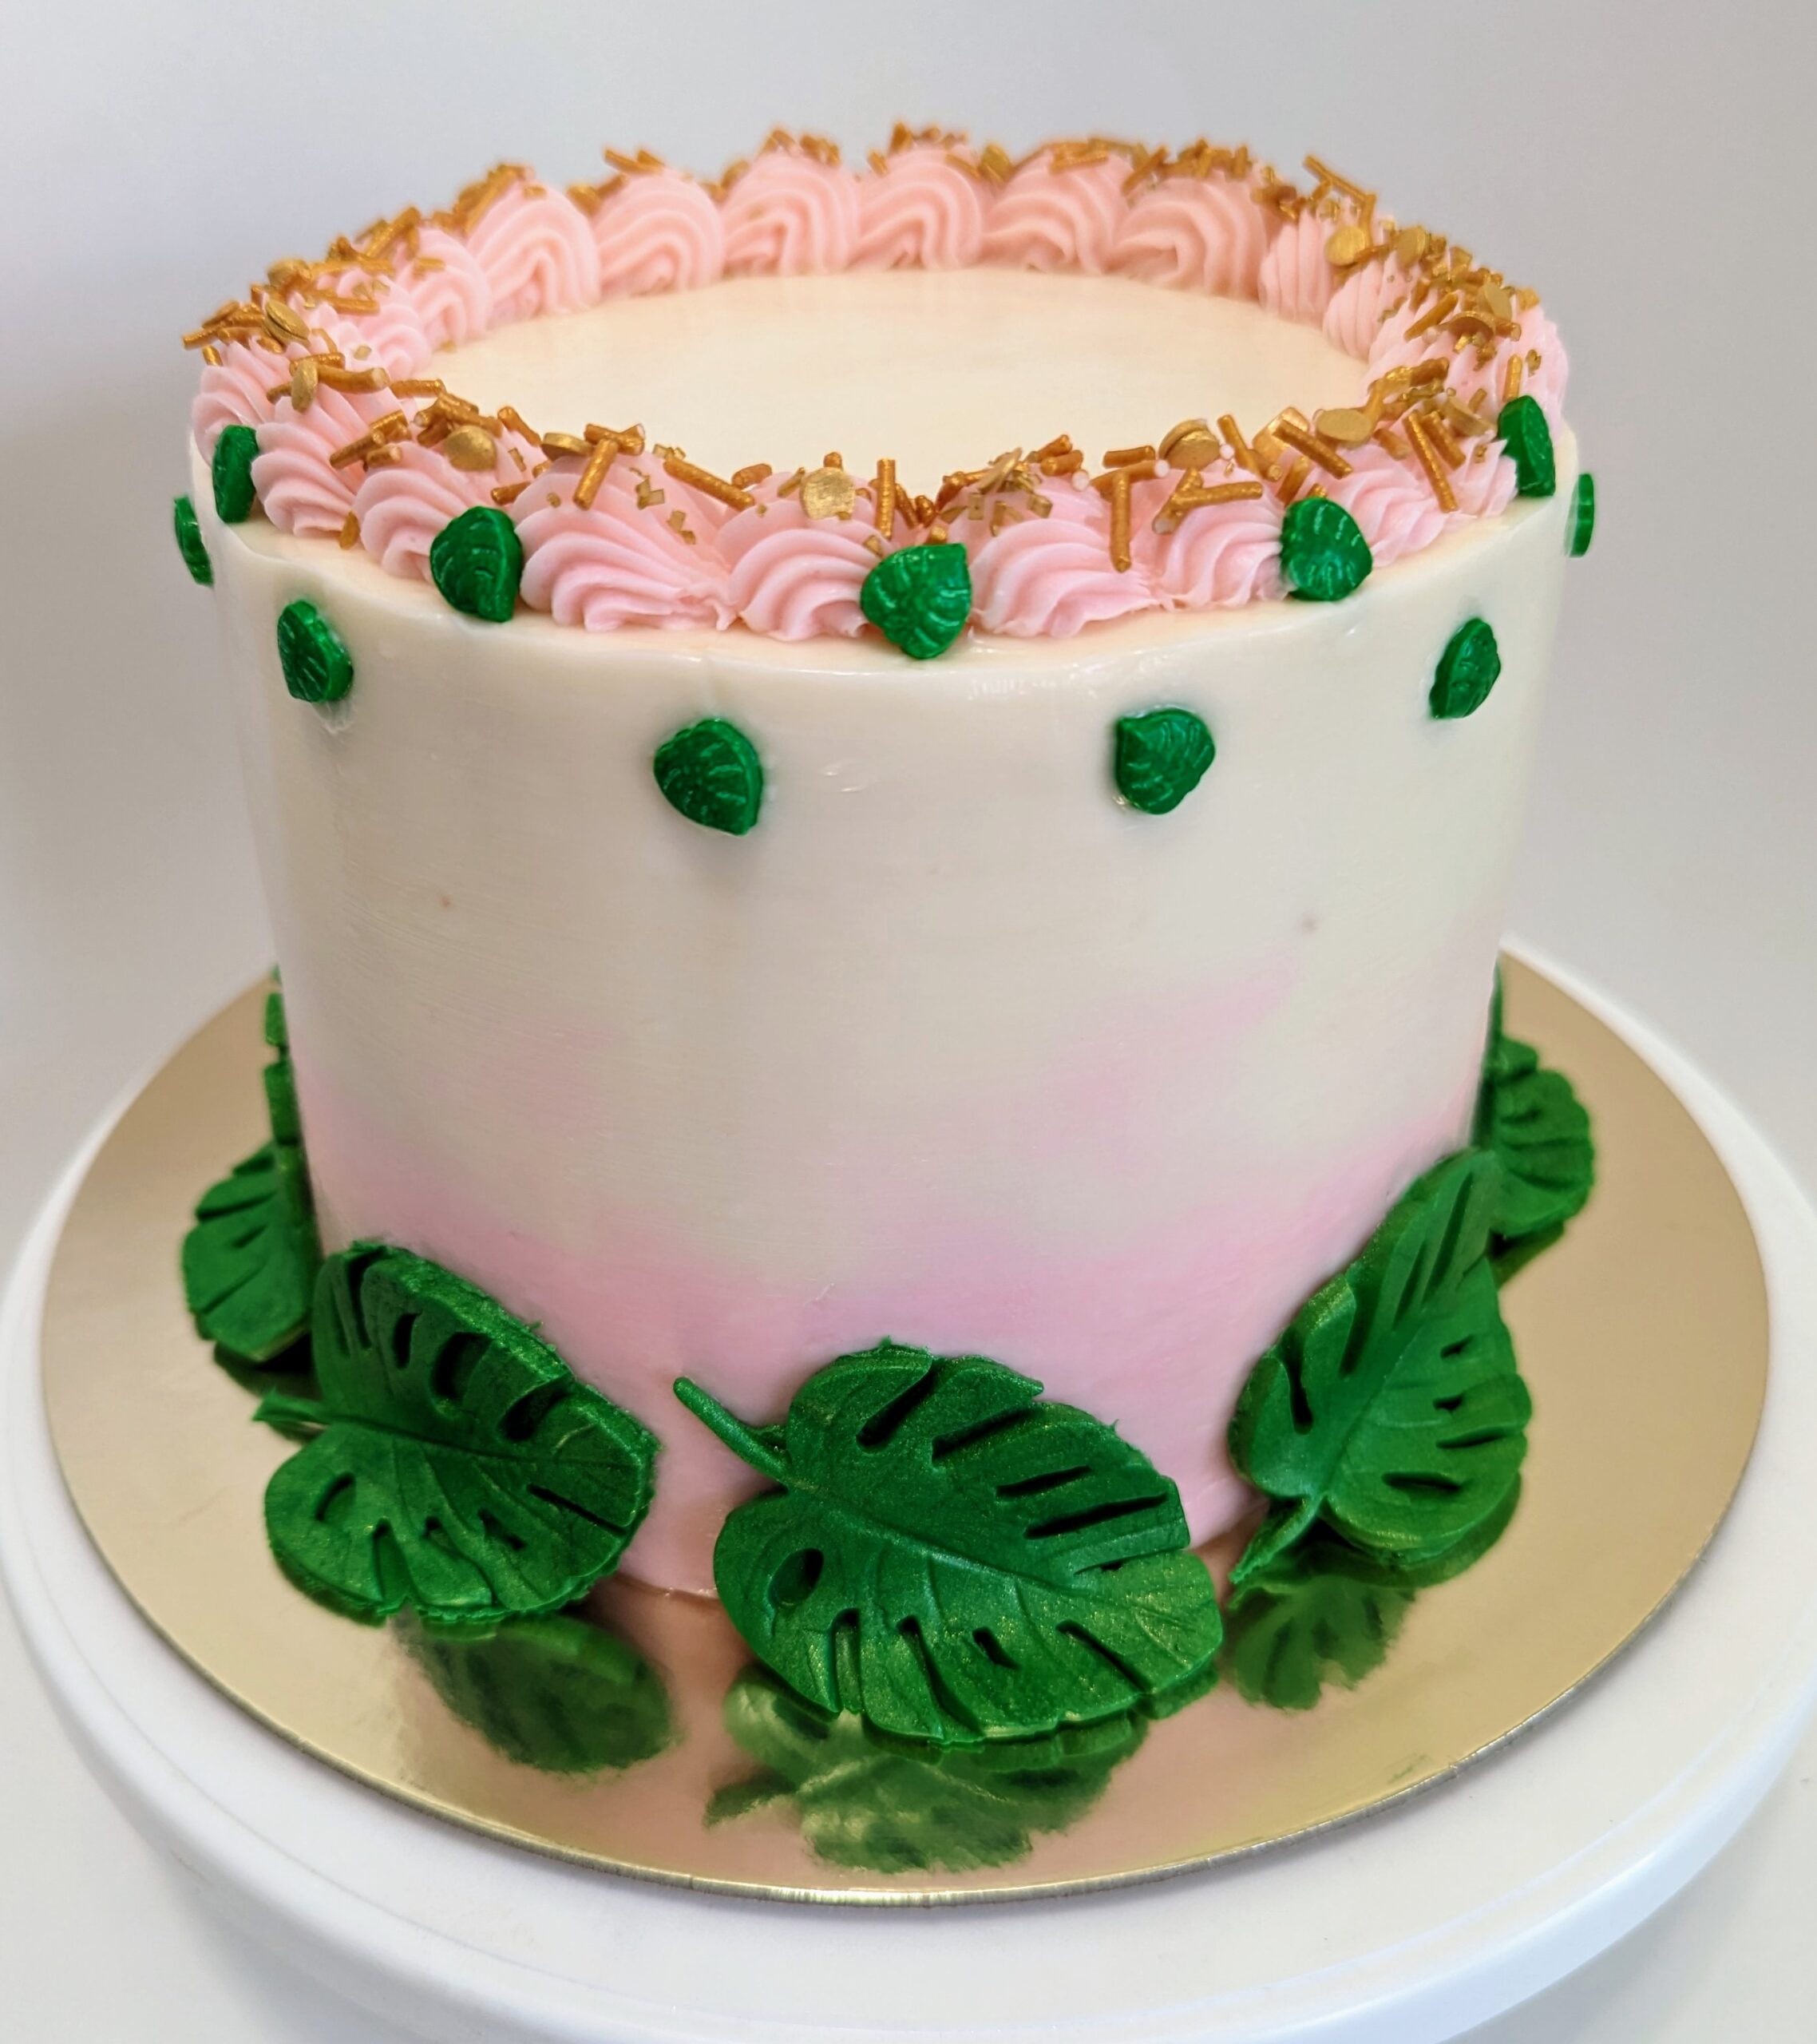 Gradient Cake with Leaves